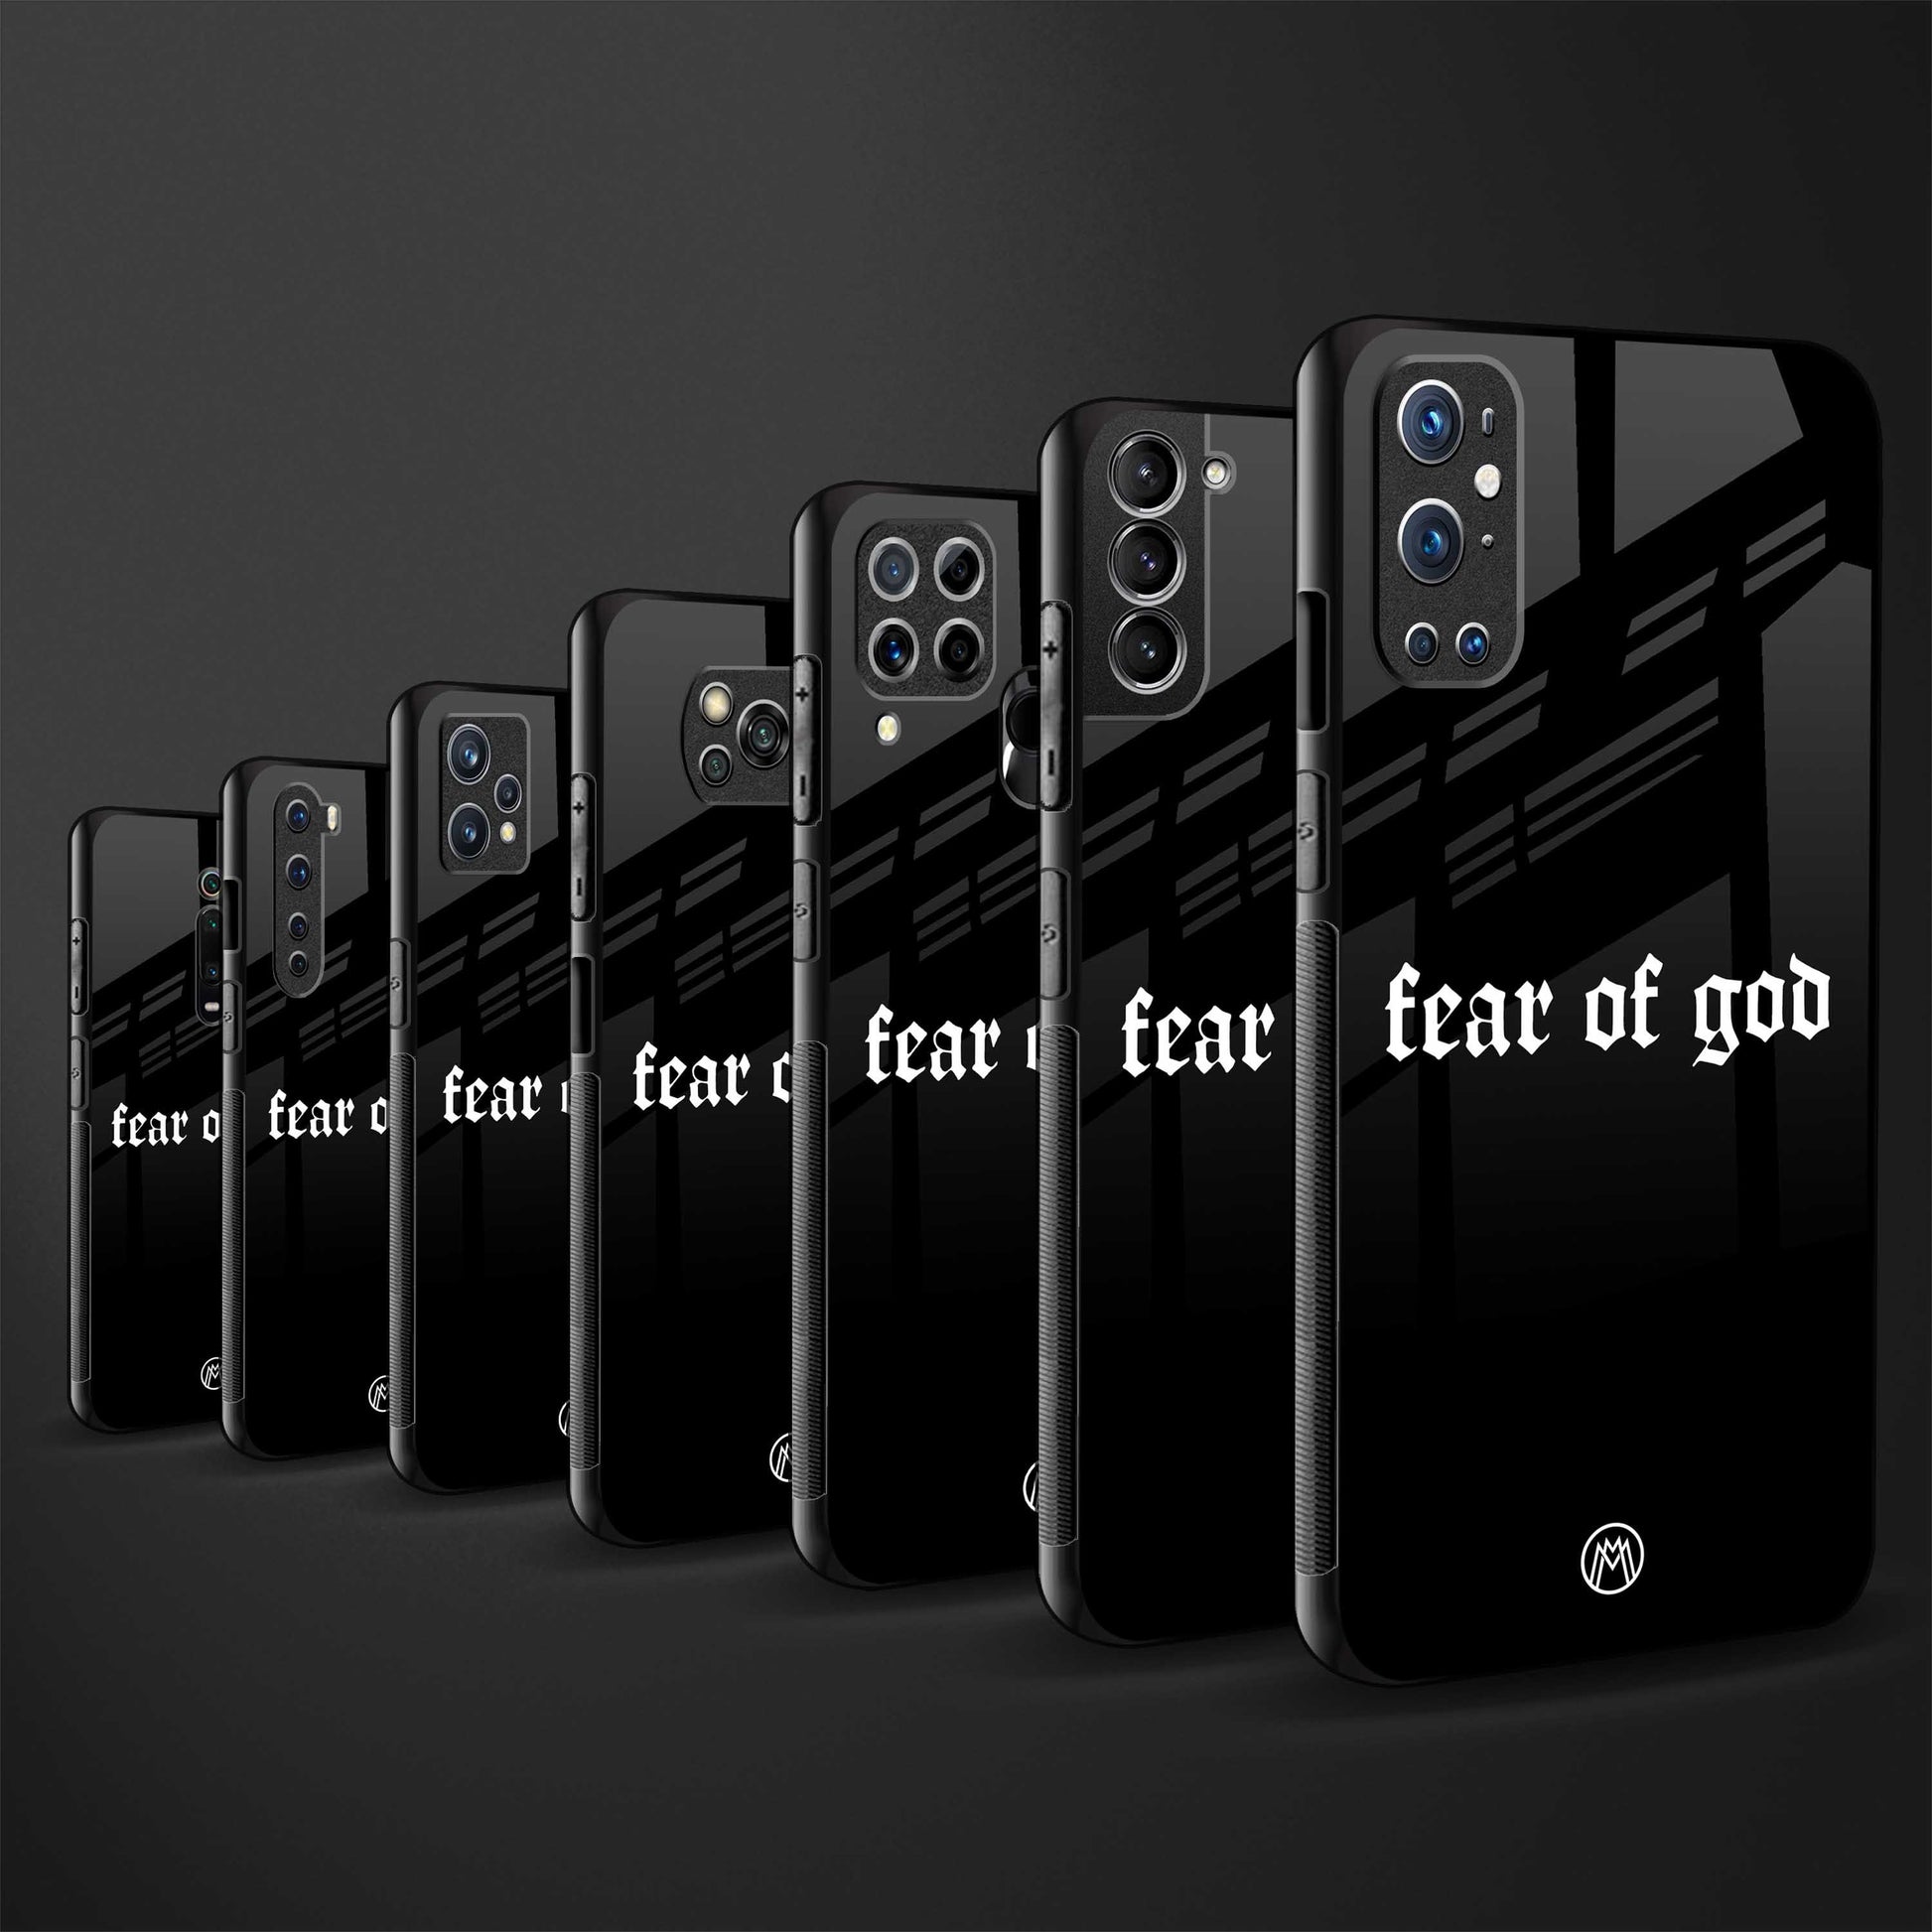 fear of god phone cover for vivo y91i